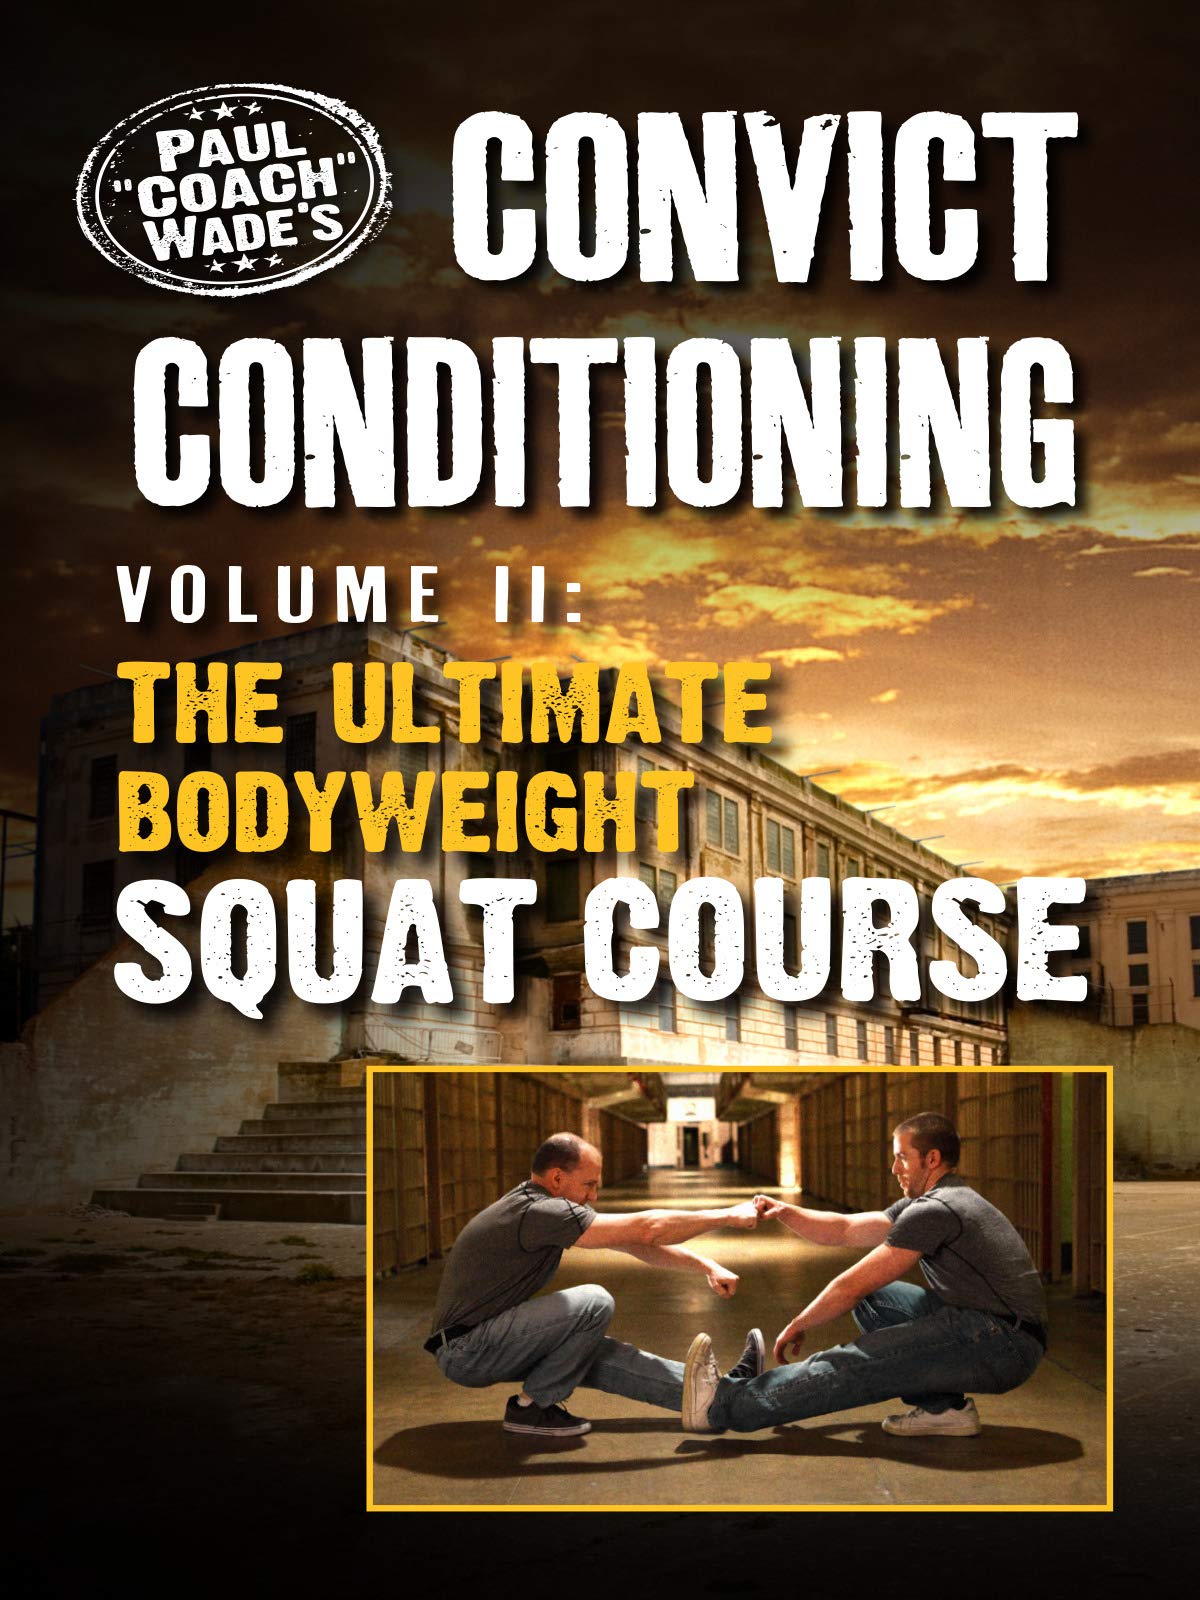 Convict Conditioning - Vol 2 The Ultimate Bodyweight Squat Course